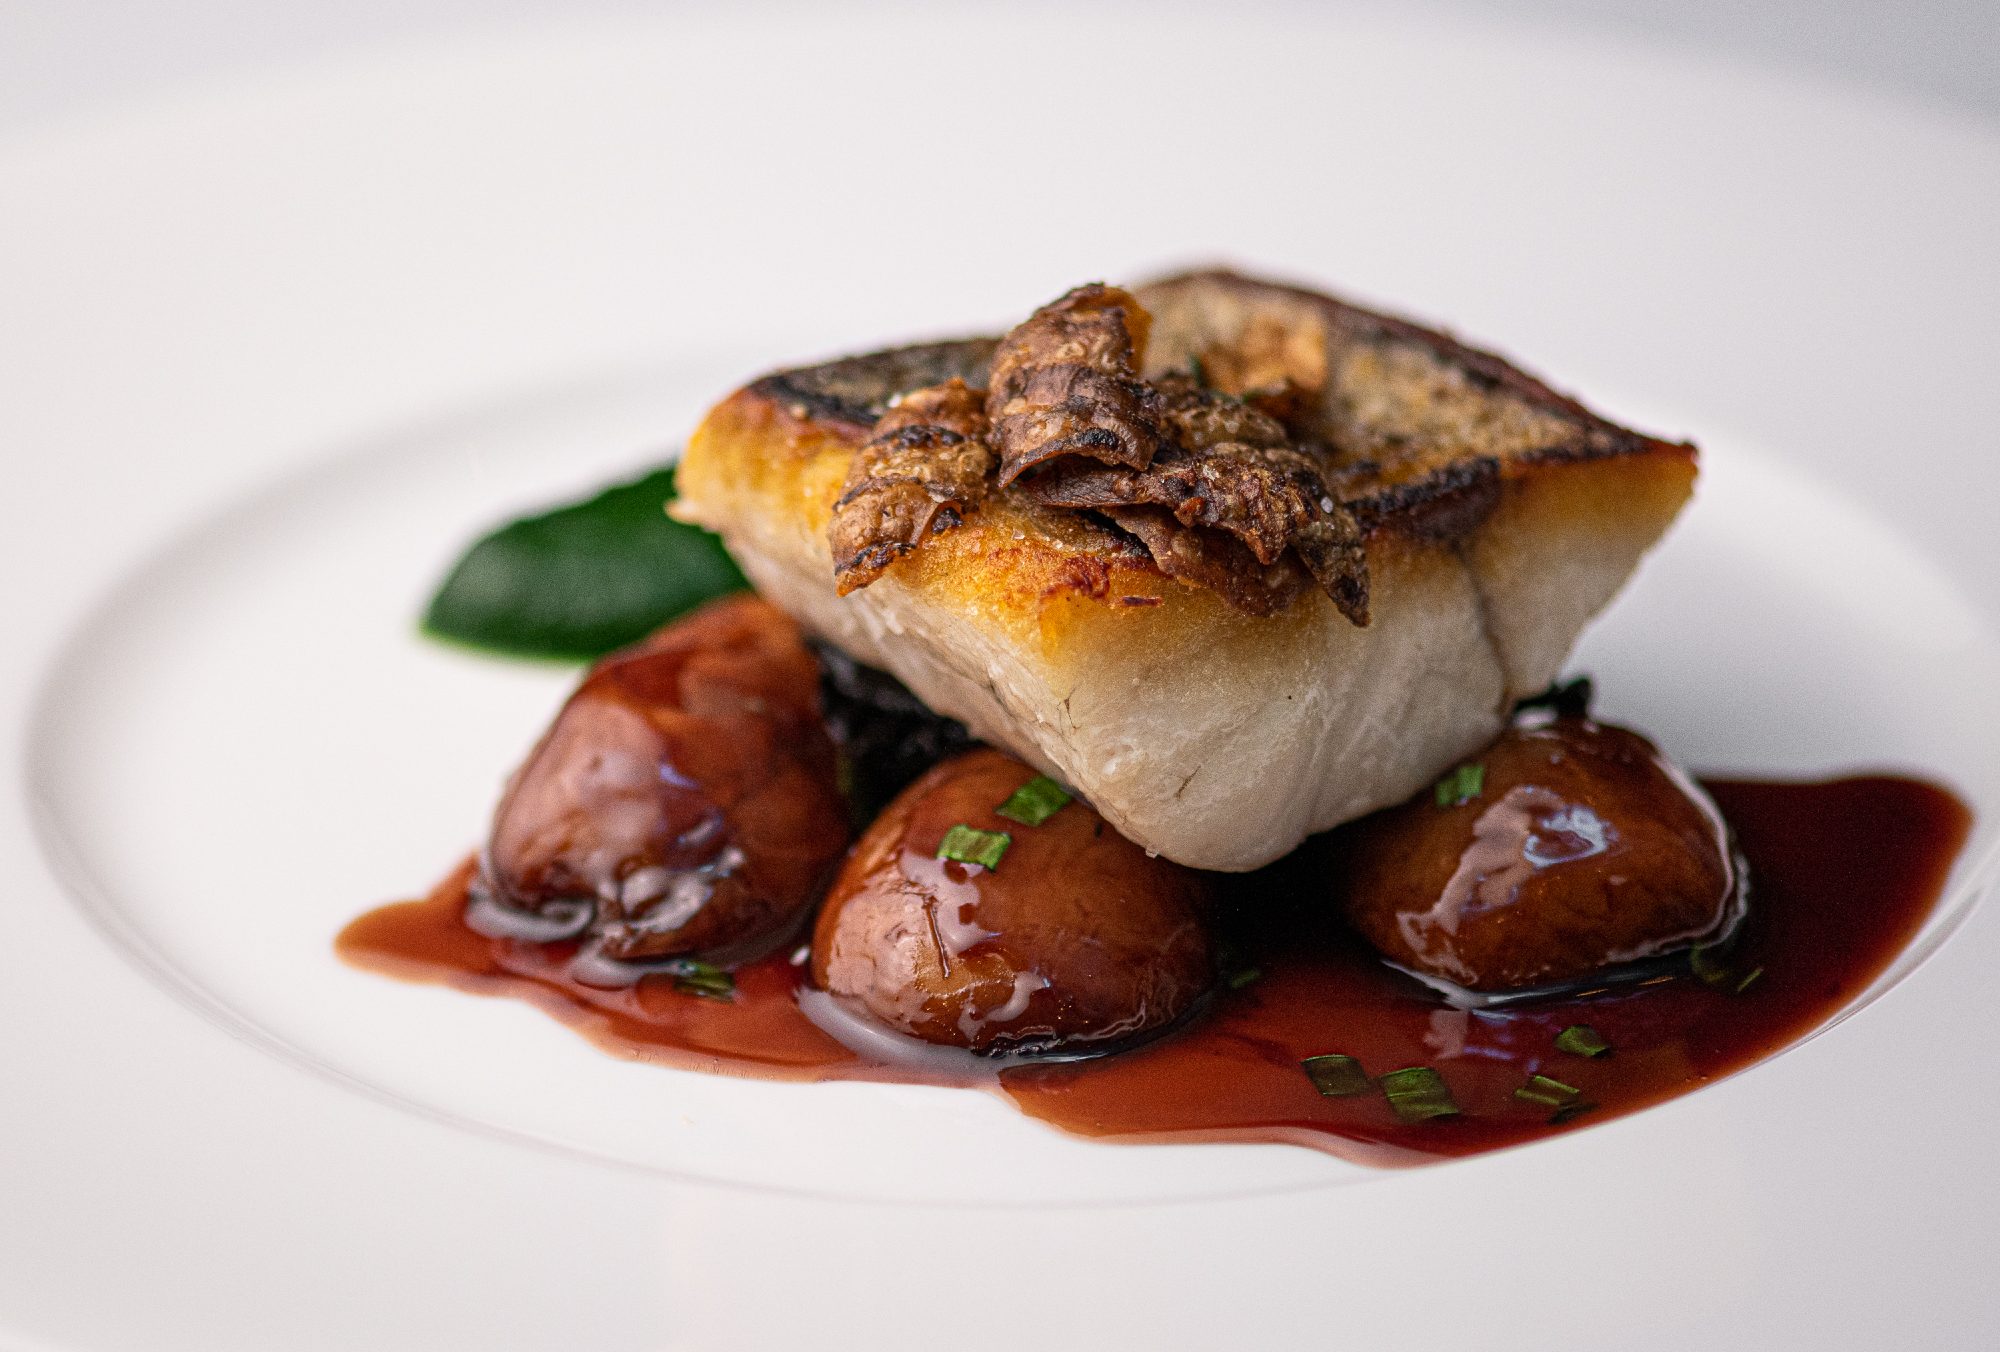 Griddled south coast line caught fillet of seabass, braised jerusalem artichokes, parsley purée, wild mushrooms, red wine and tarragon jus, one of the dishes on the ever-changes menu at Seven Park Place